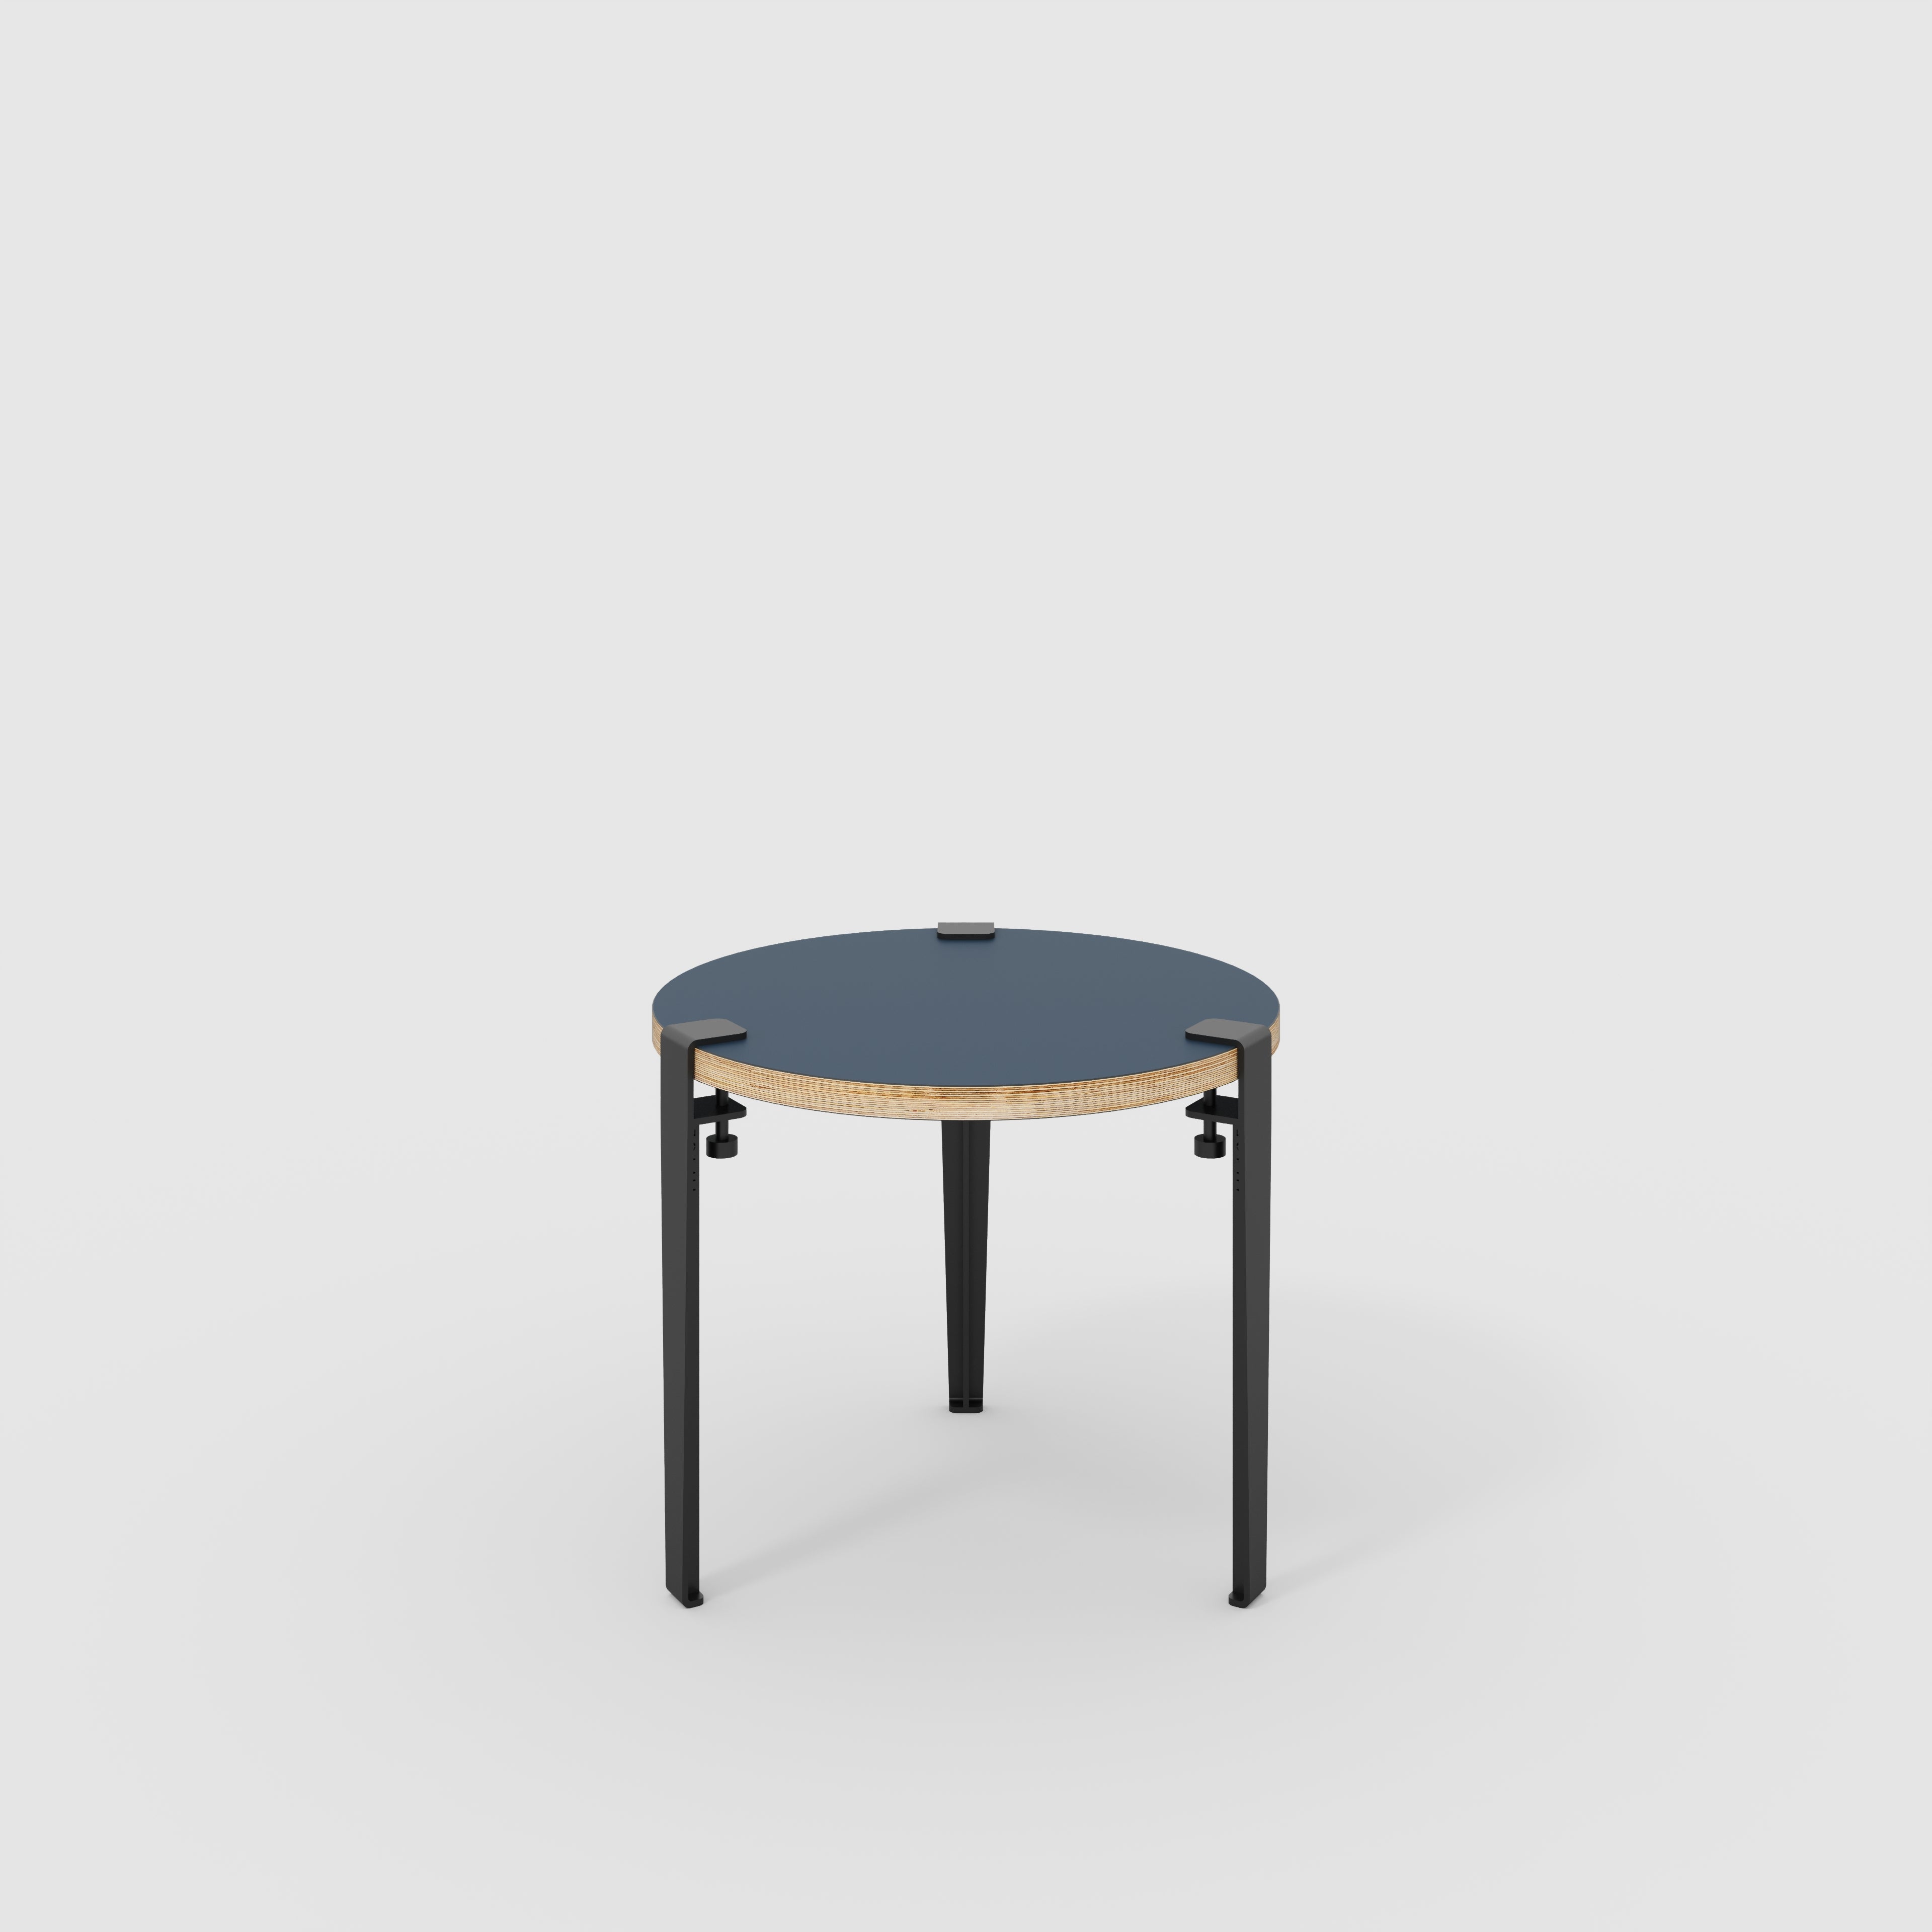 Round Side Table with Black Tiptoe Legs - Formica Night Sea Blue - 500(dia) x 430(h)